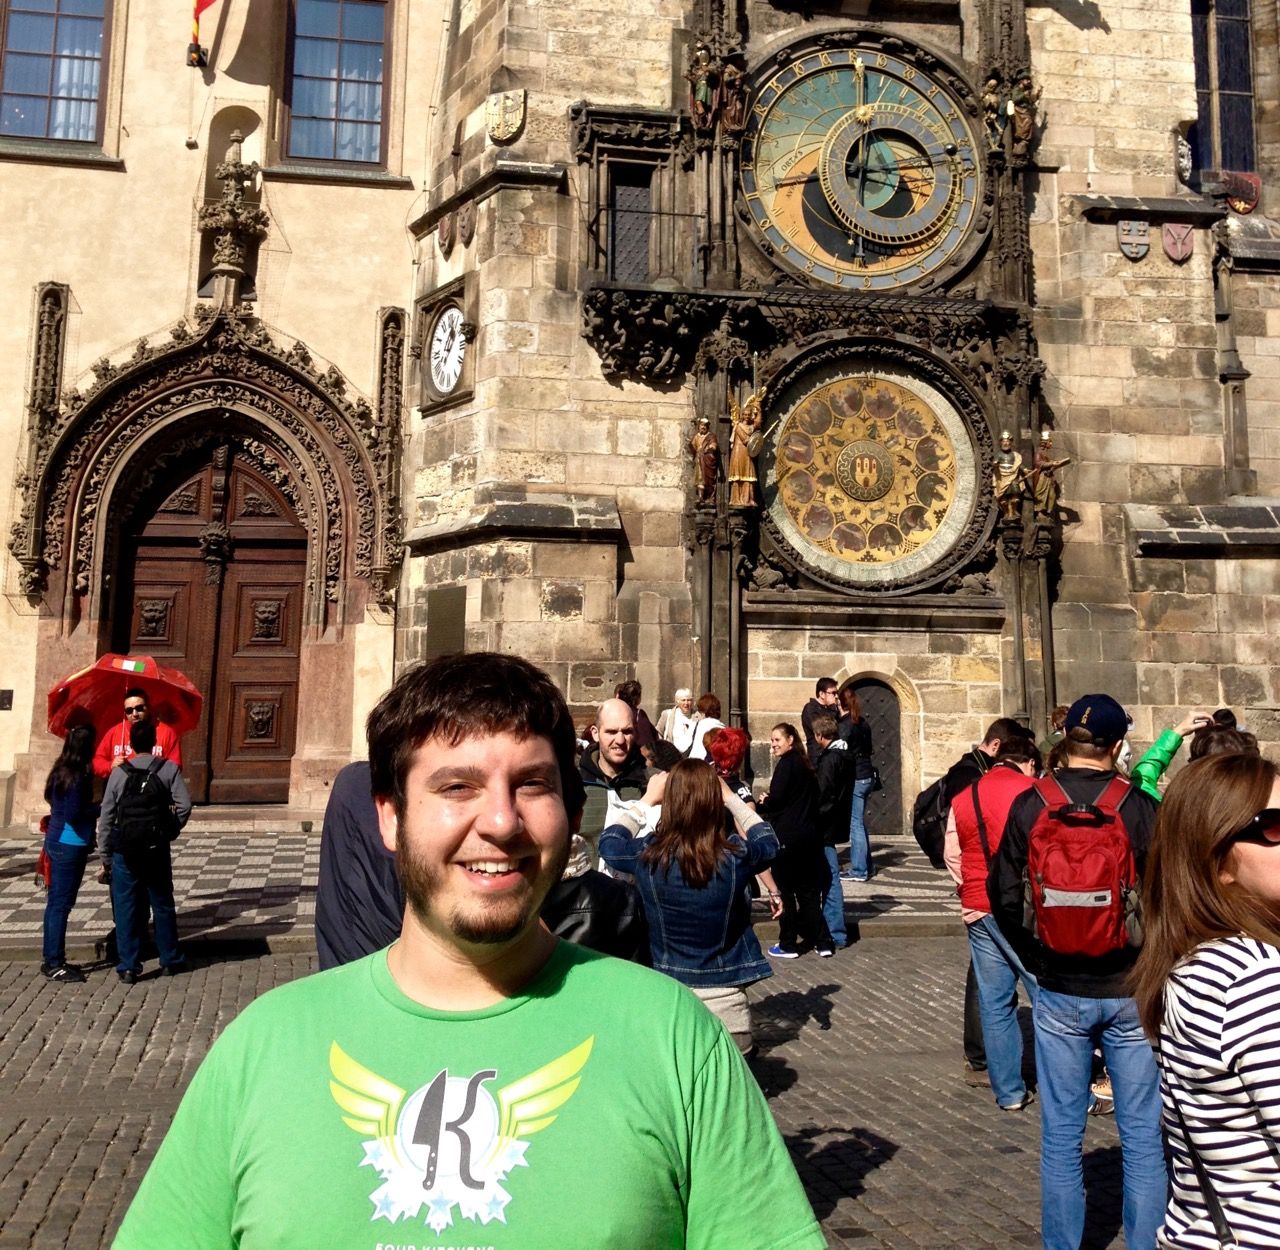 Chris standing in front of the Prague astronomical clock.